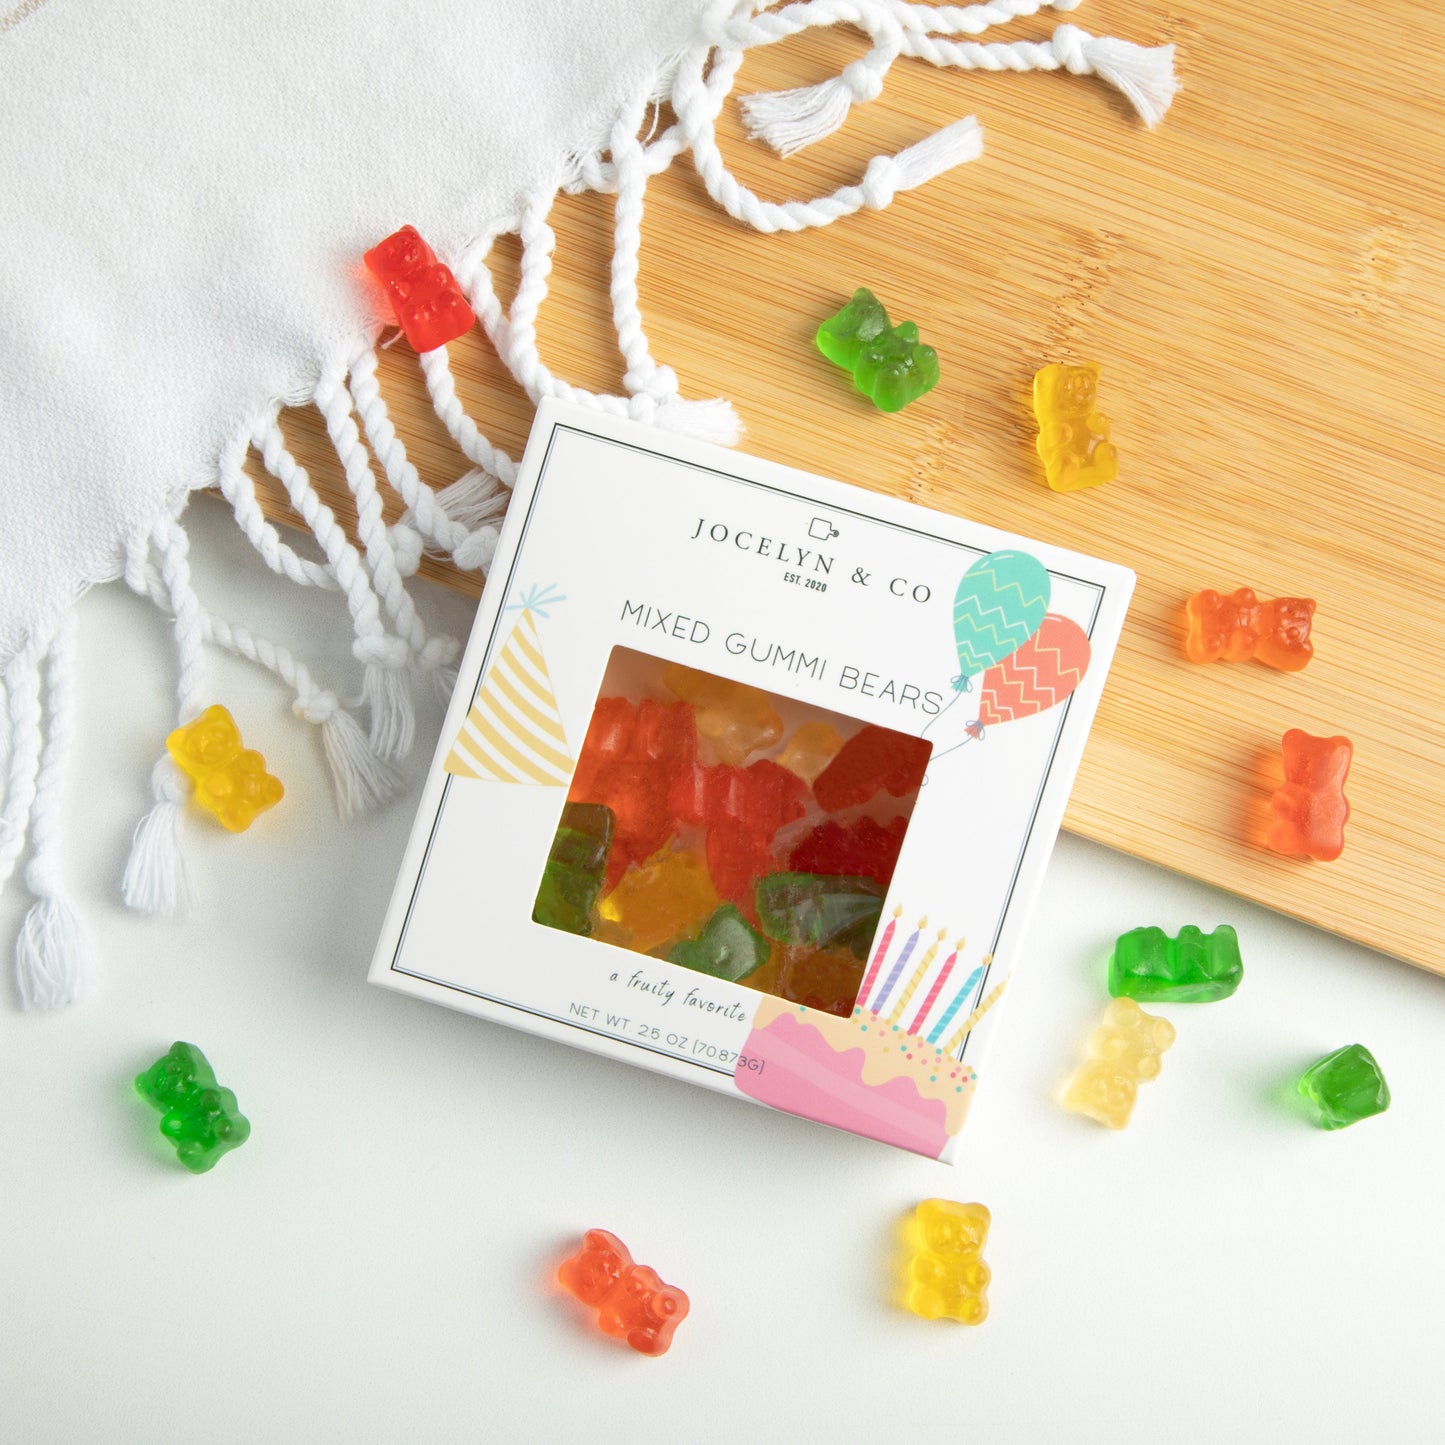 Private Label Packaging Only for Birthday Gummi Bears-500